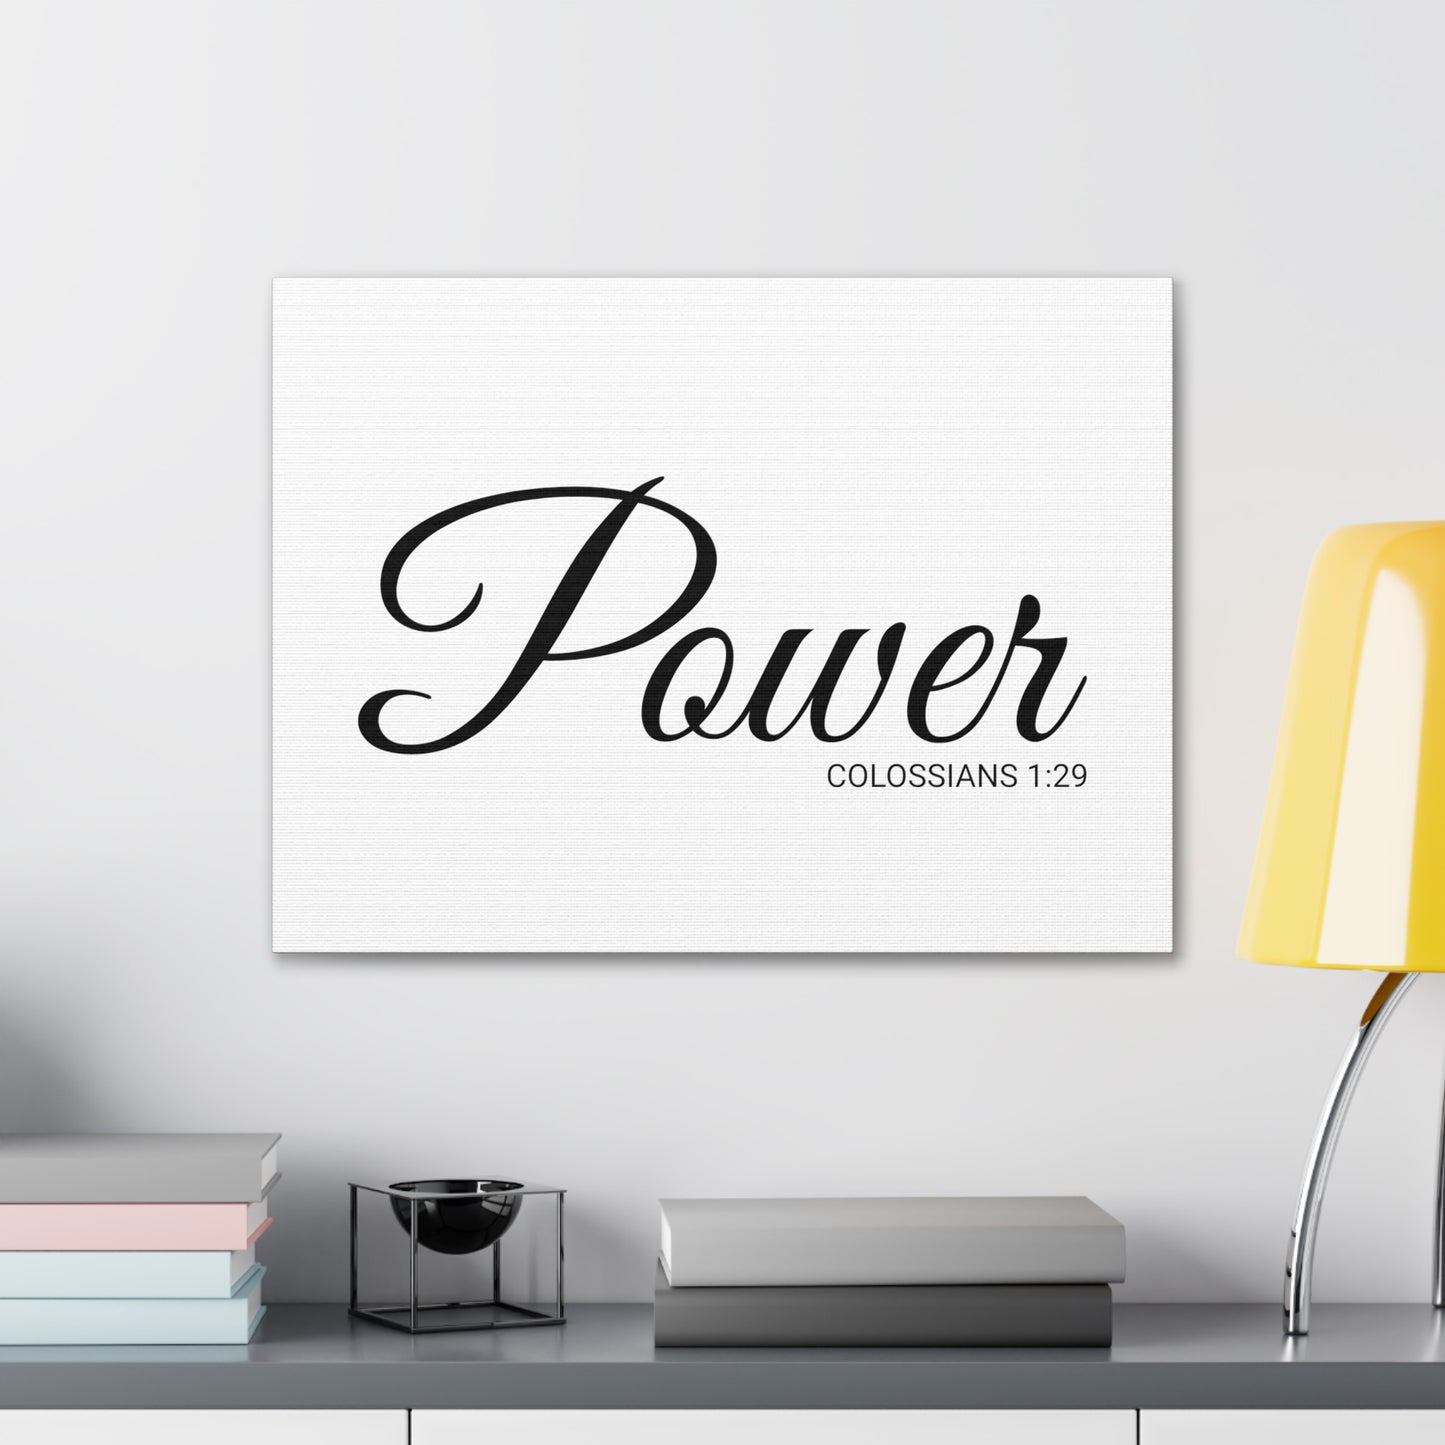 Christian Wall Art "Power" Verse Colossians 1:29 Ready to Hang Unframed